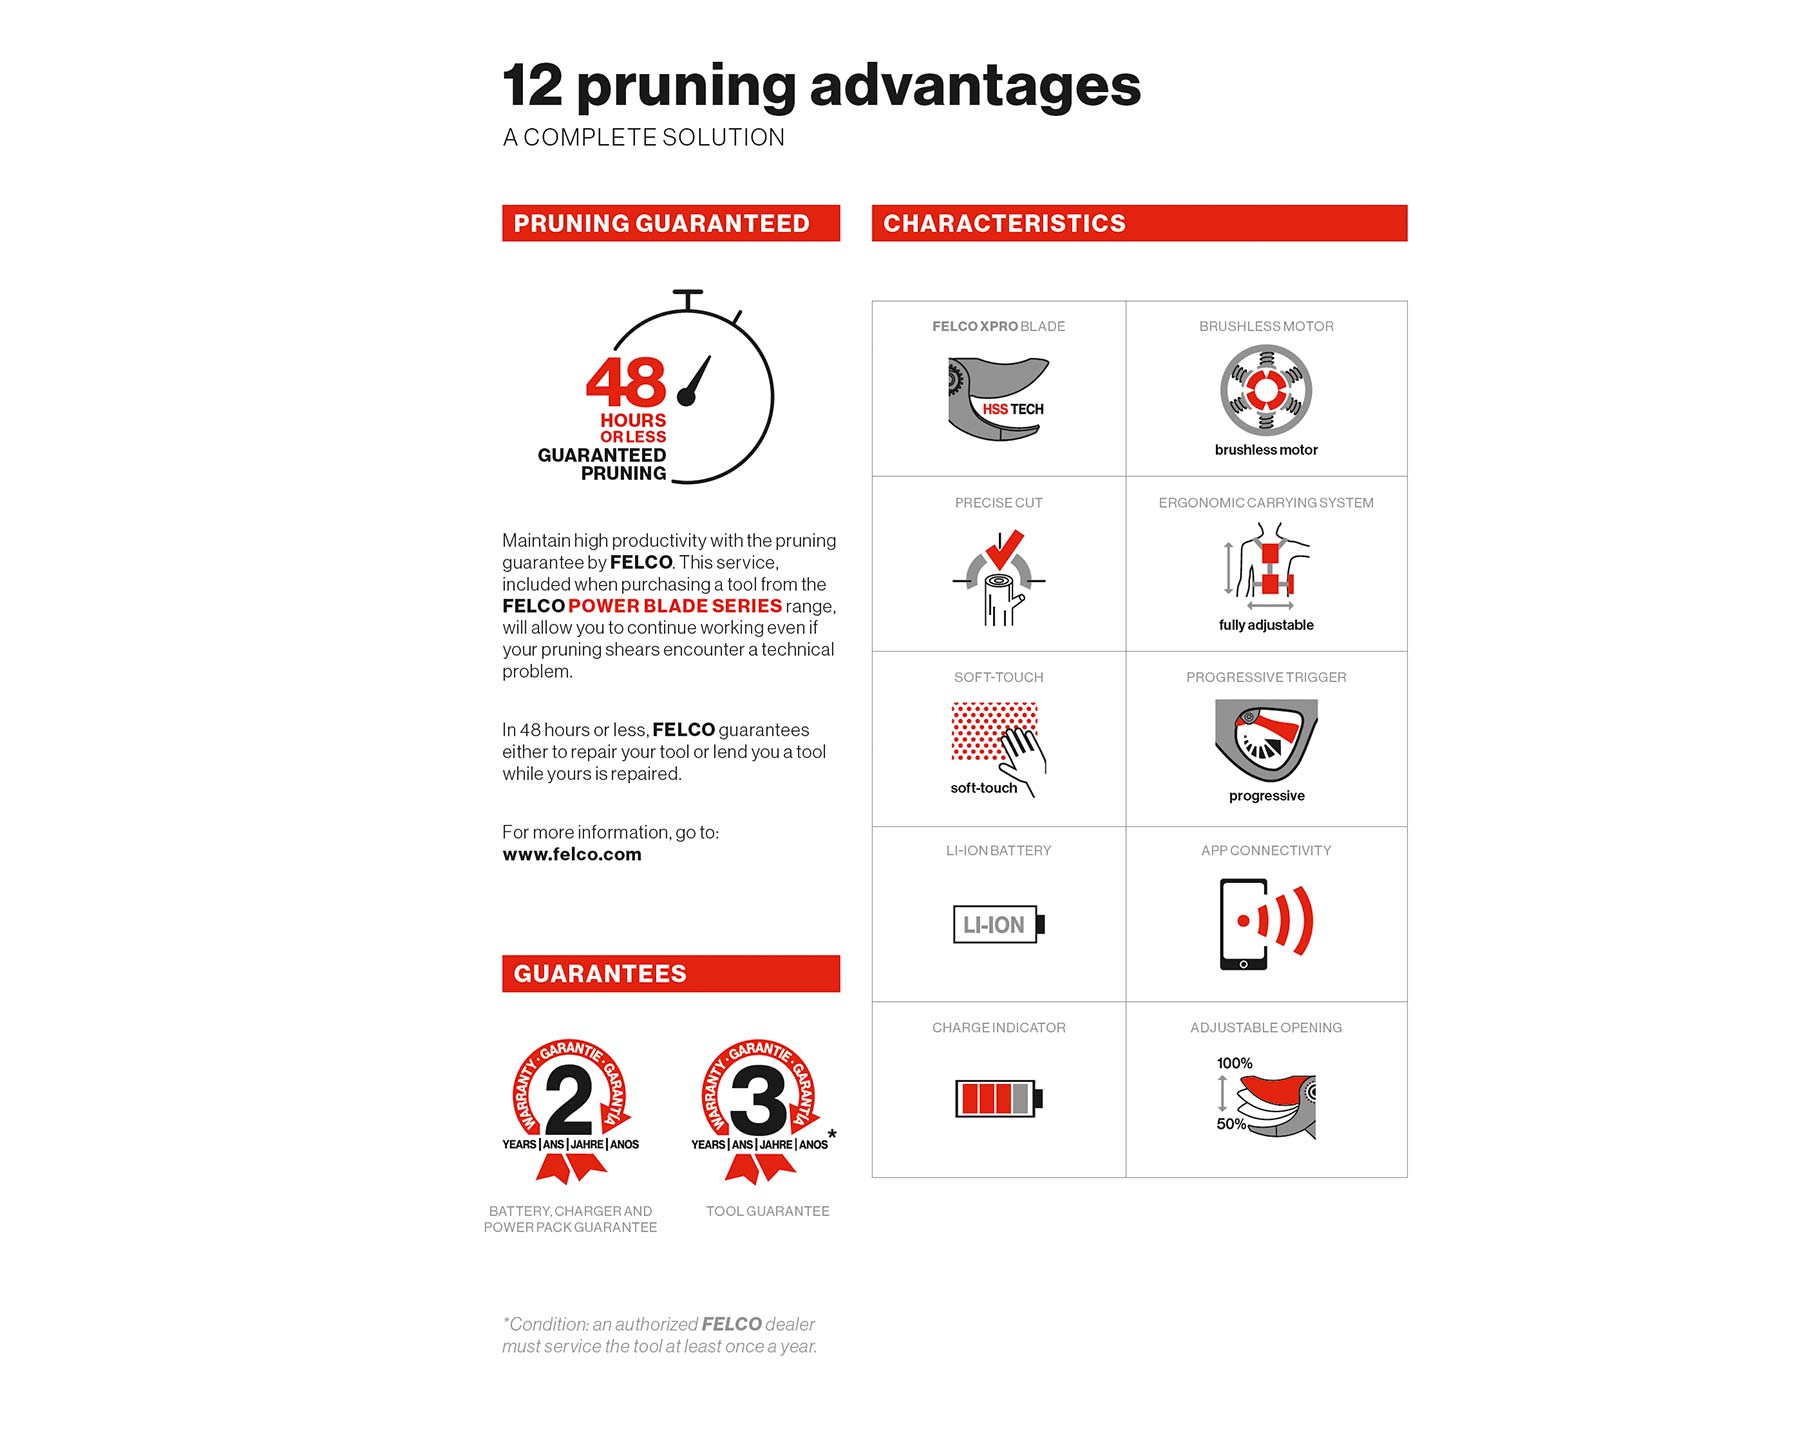 12 advantages of using Felco Powerblade electric pruning shears 802, 812, 822